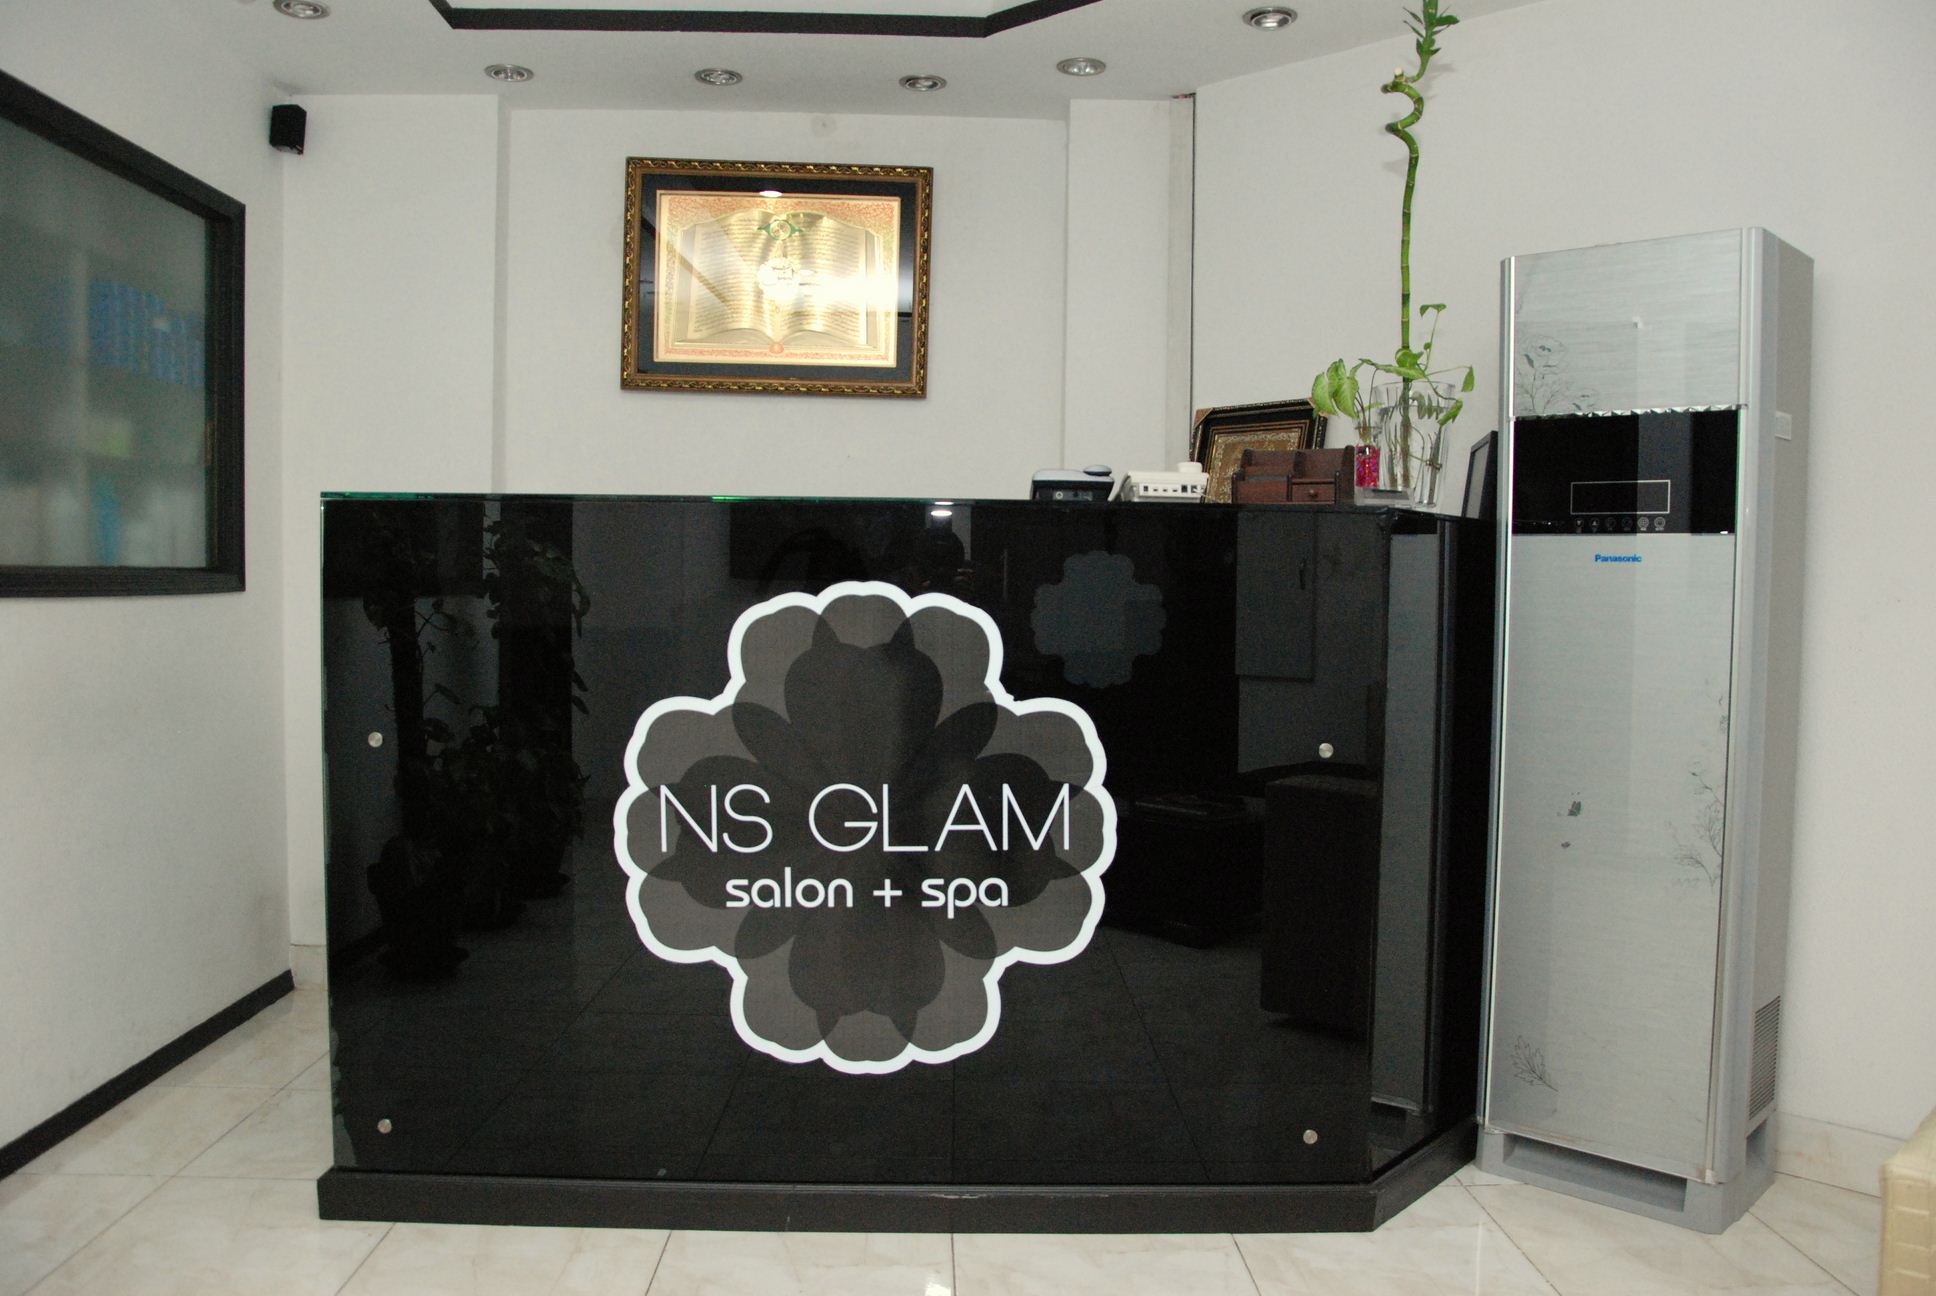 Deal For Him! Receive a Whitening Facial With Deep Cleansing + Haircut + Shave Or Trim + Hair Protein Treatment + Head & Shoulder Massage from NS Glam Salon